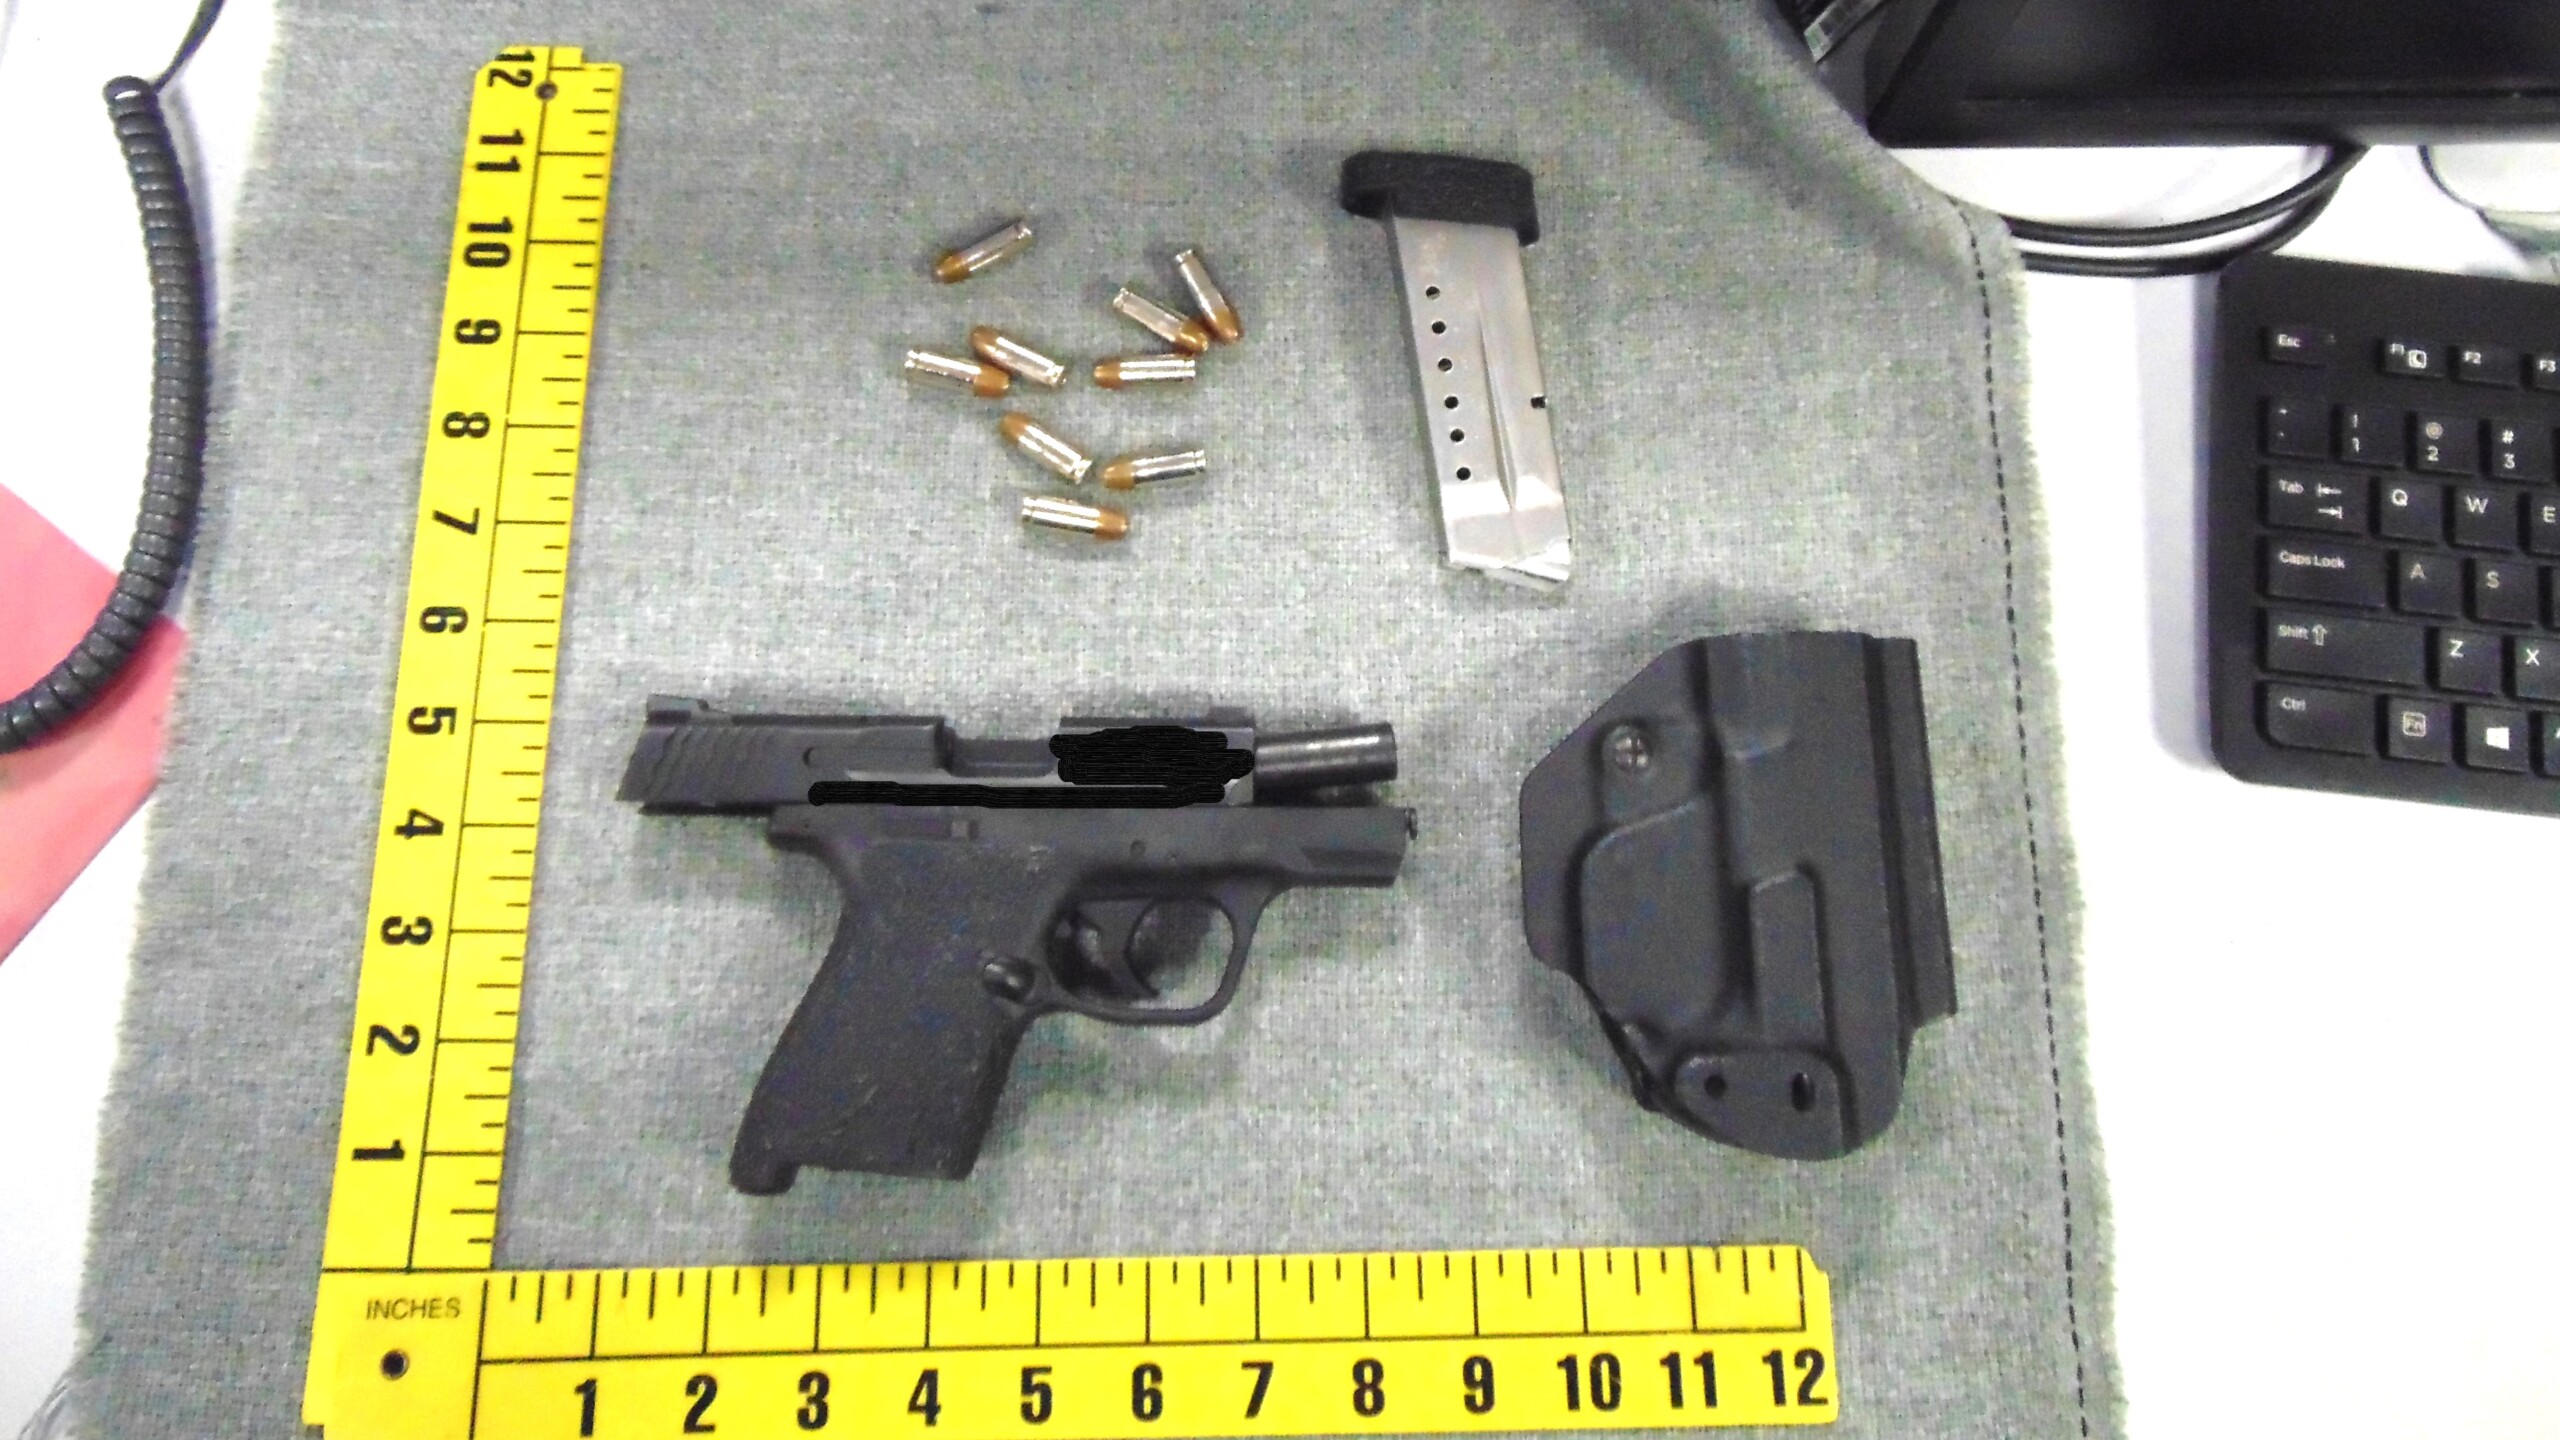 Featured image for “Jacksonville’s airport among Florida’s worst for seized guns”